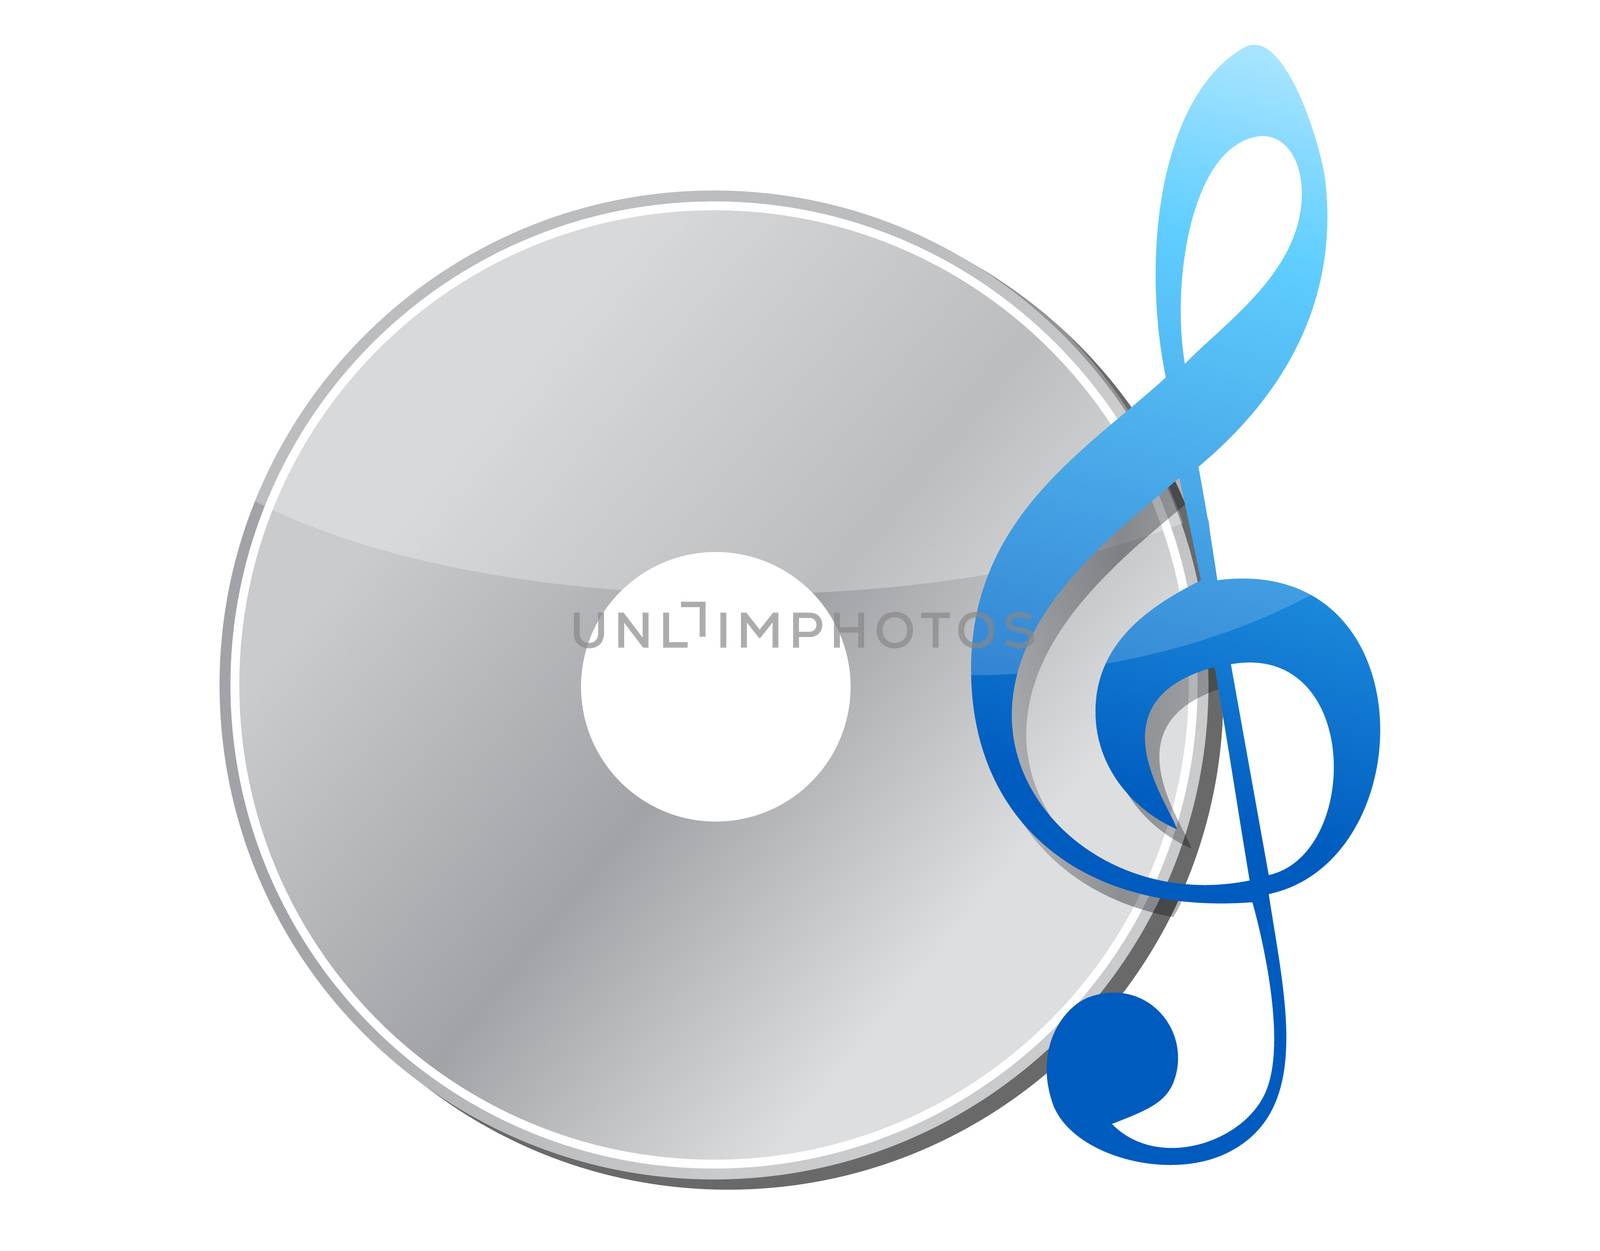 illustration of music note and cd